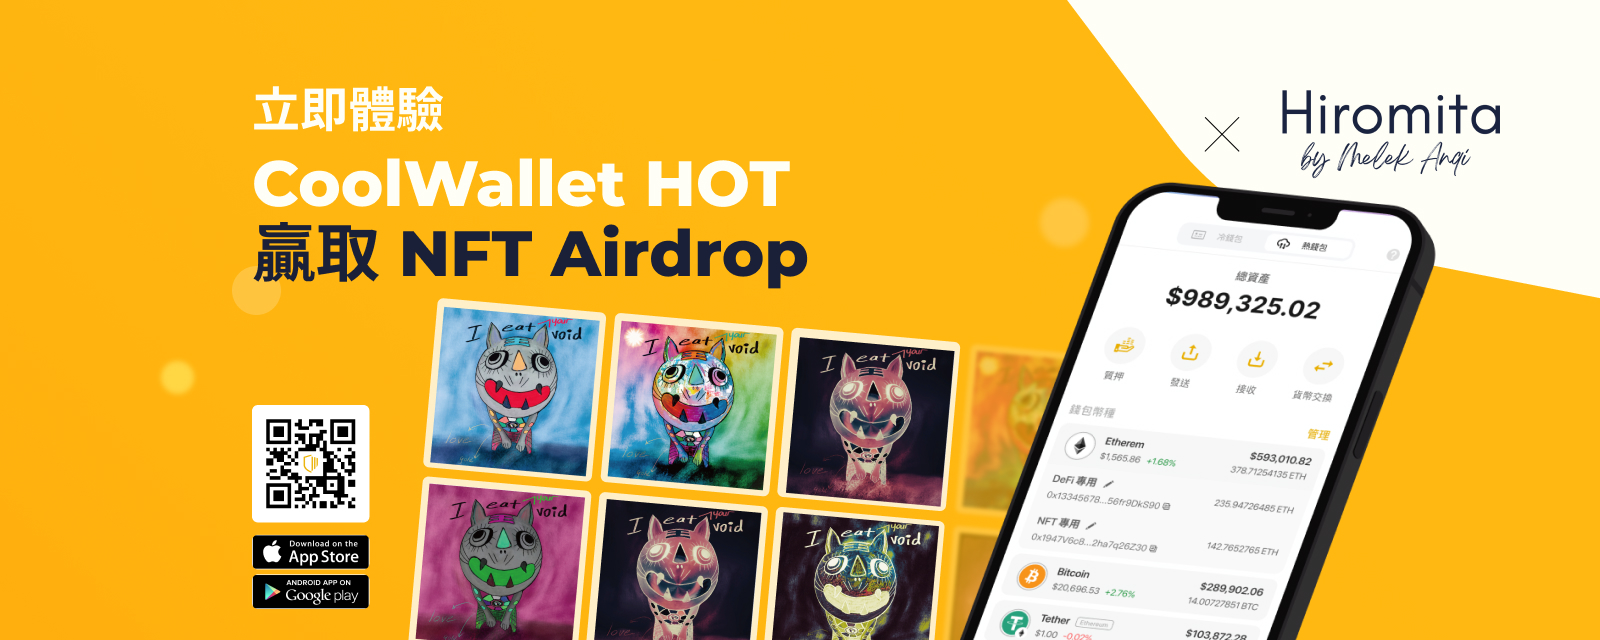 Activate-CoolWallet-HOT-Win-NFT-Airdrop_1600x900_zh